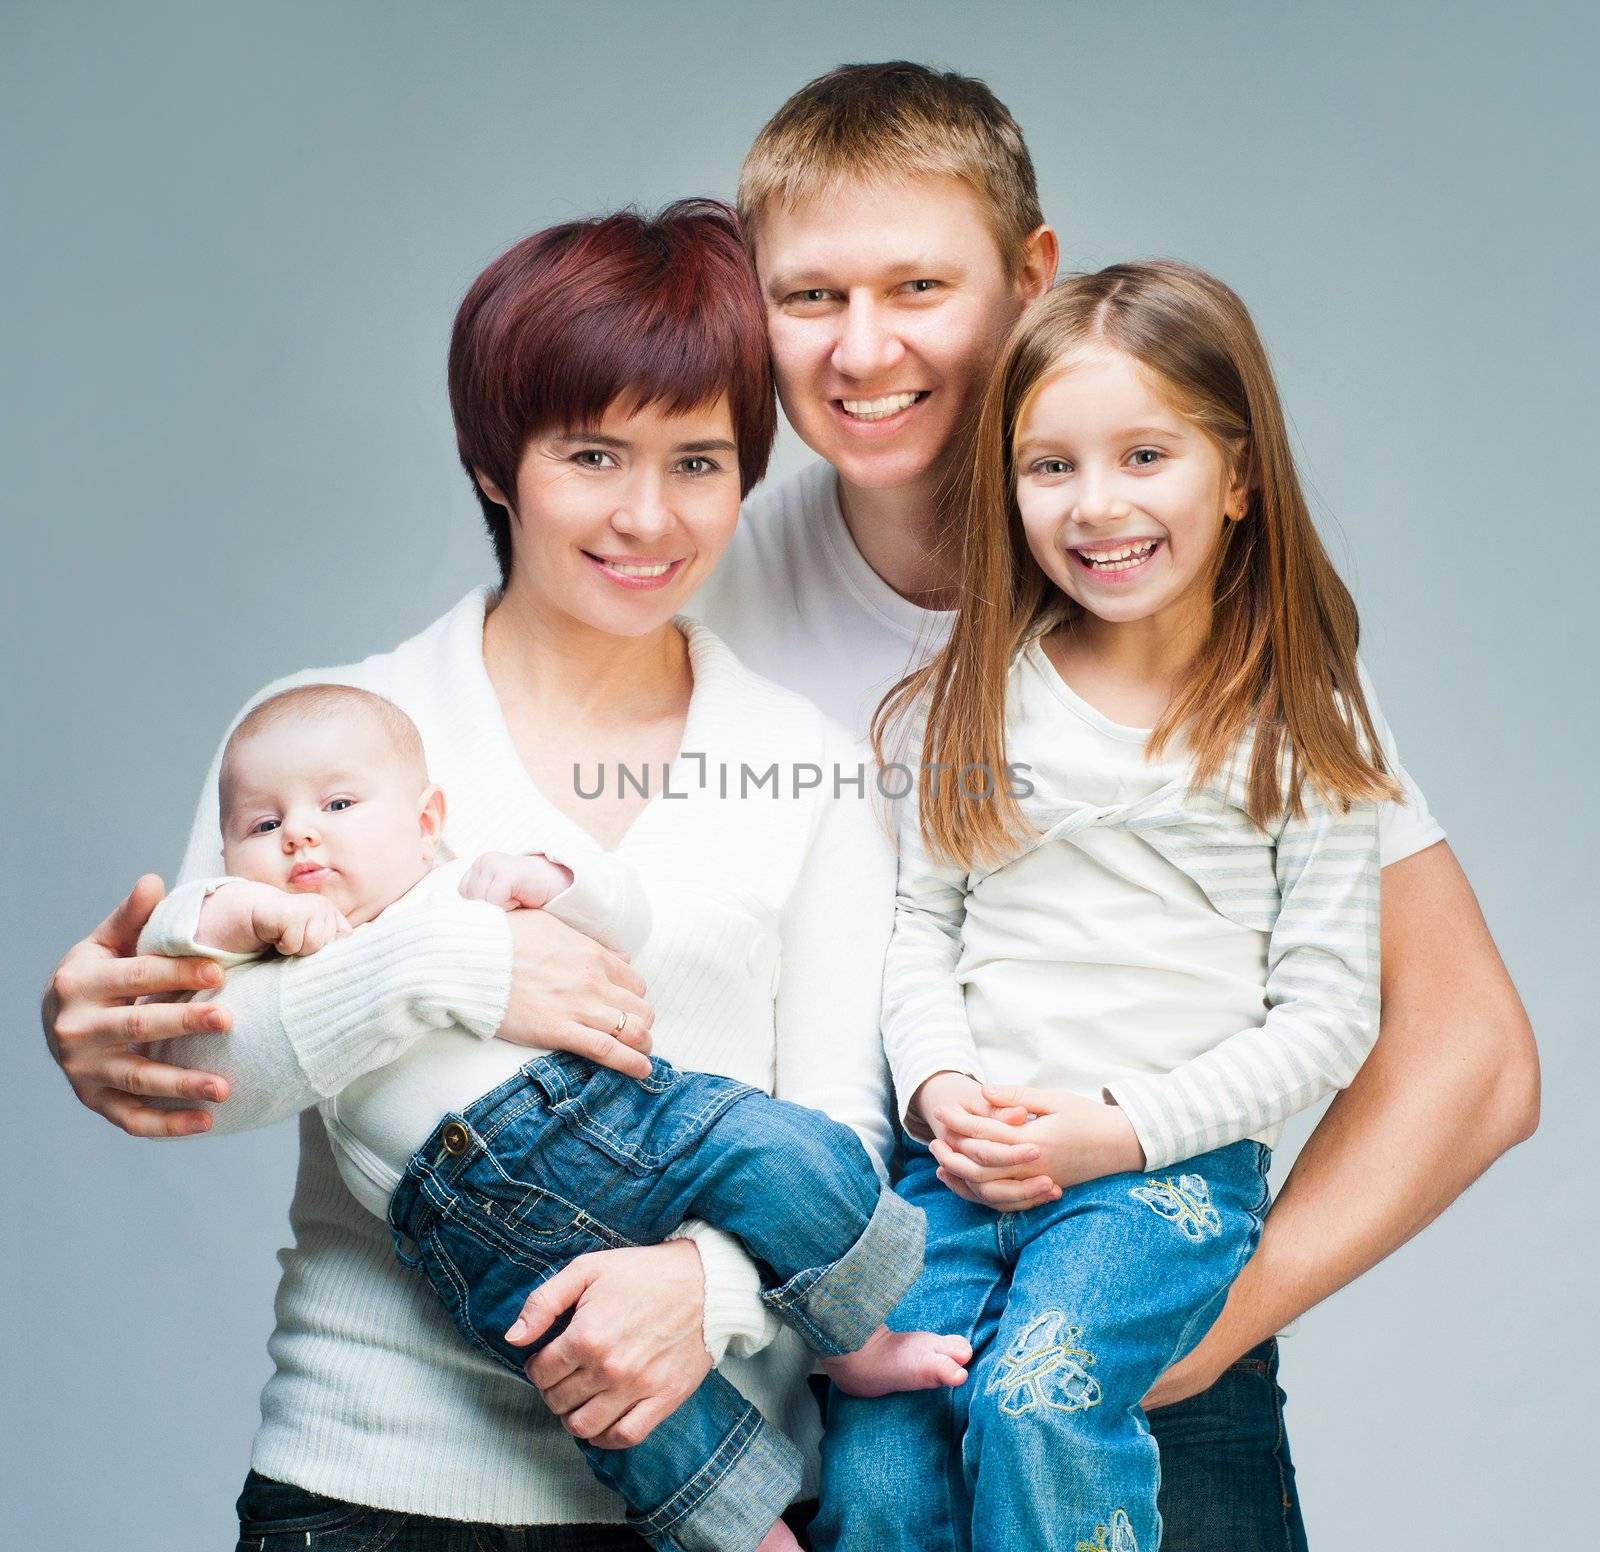 Nice smiling family looking at the camera